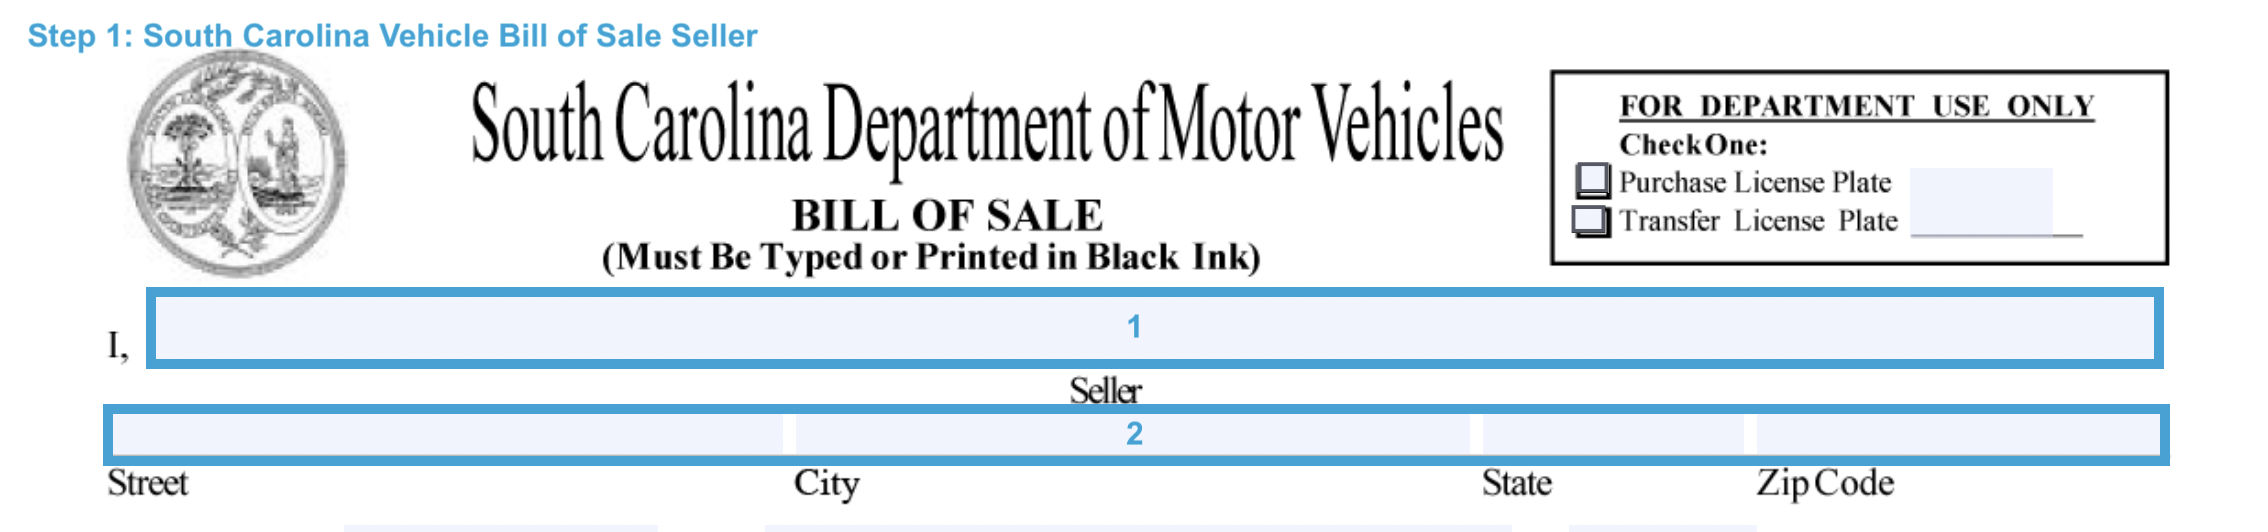 Section for filling out the seller's particulars of a South Carolina bill of sale form for car